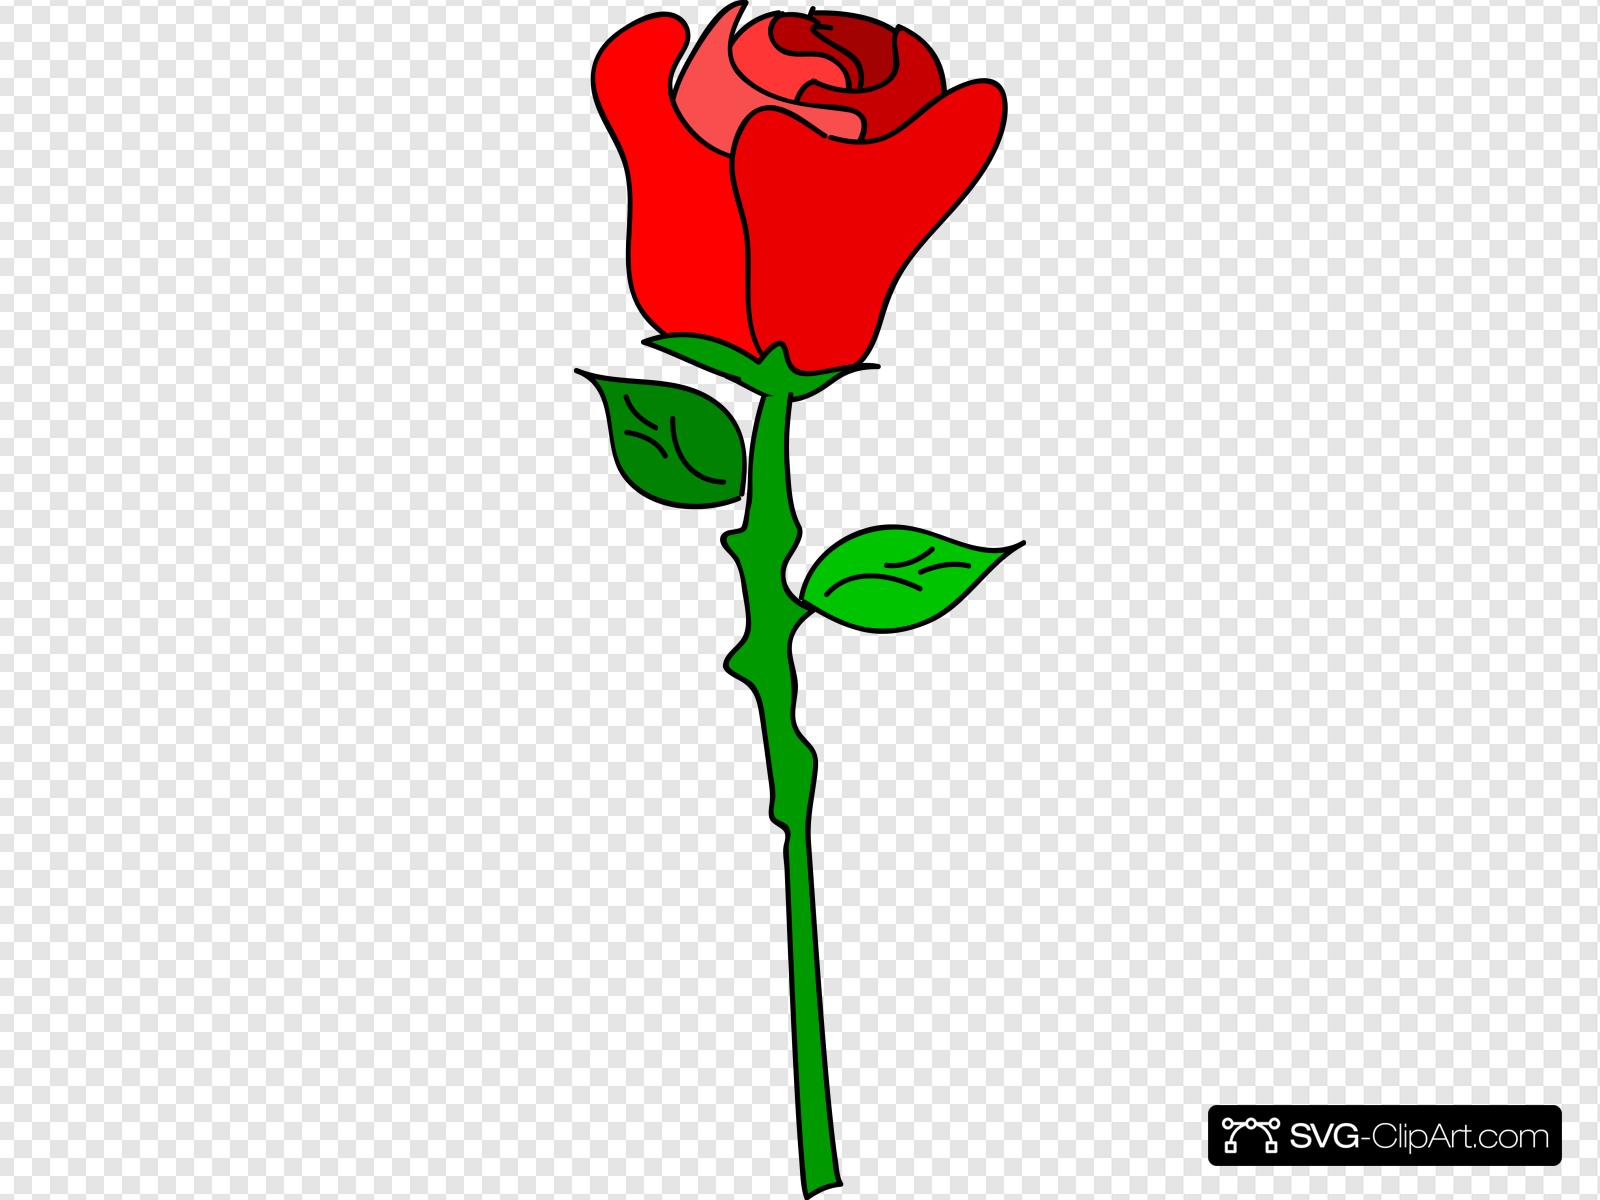 Free Hand Rose Clip art, Icon and SVG